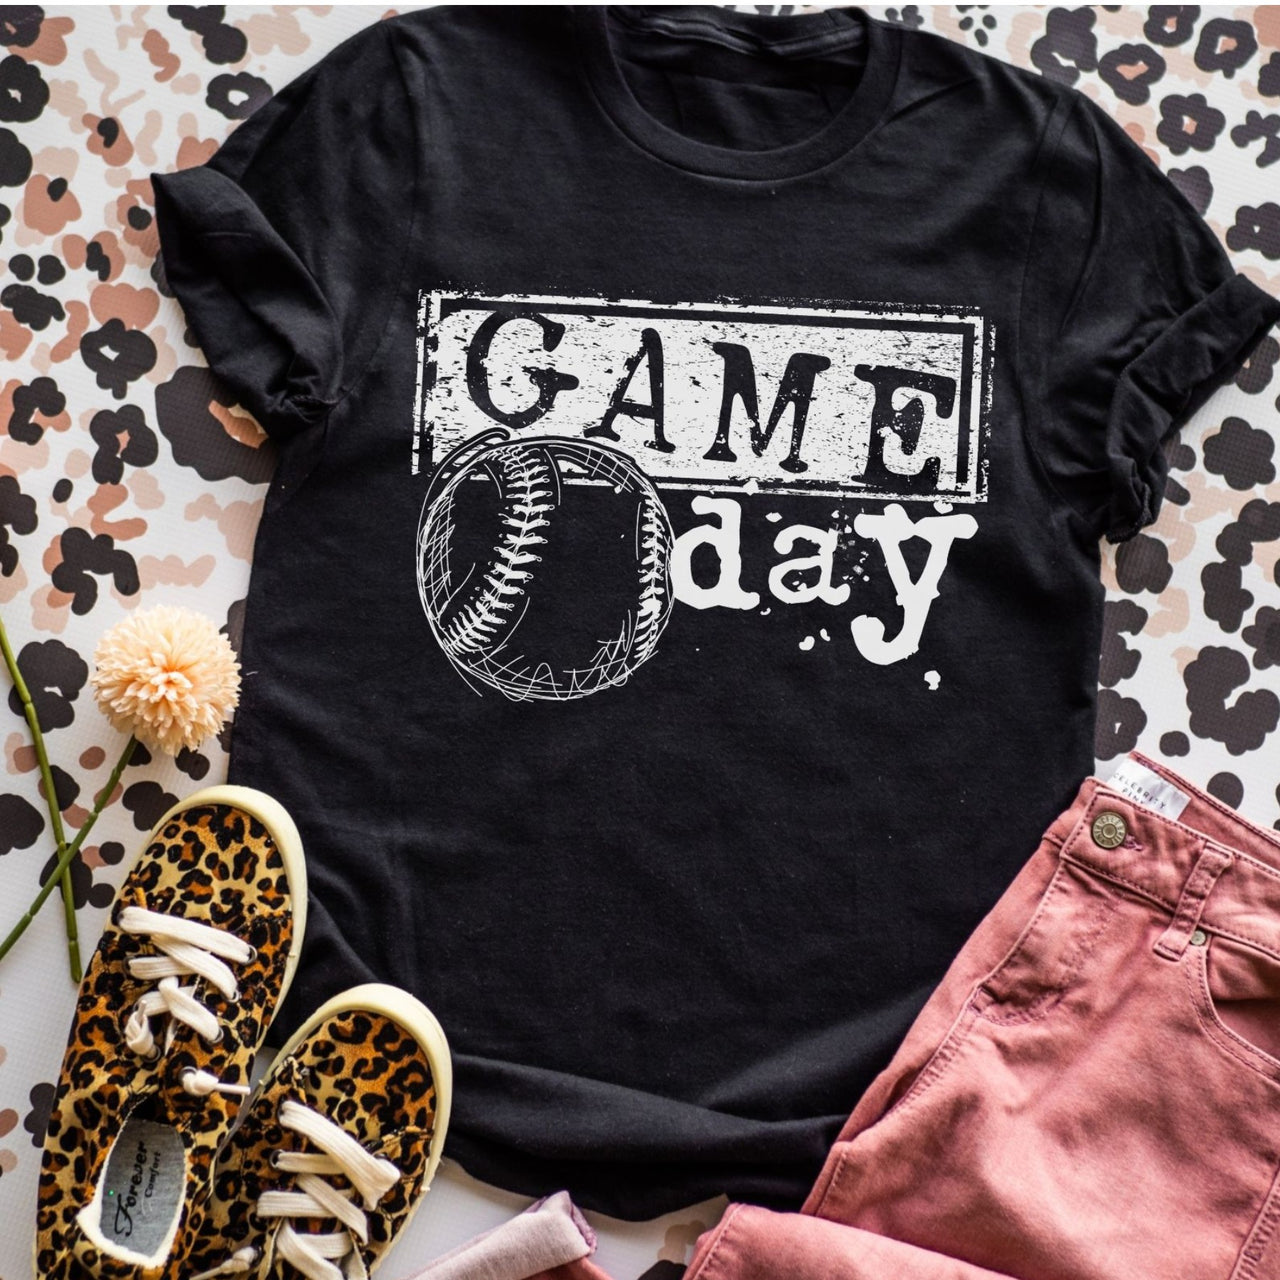 Adult - Unisex Tee (Game Day)